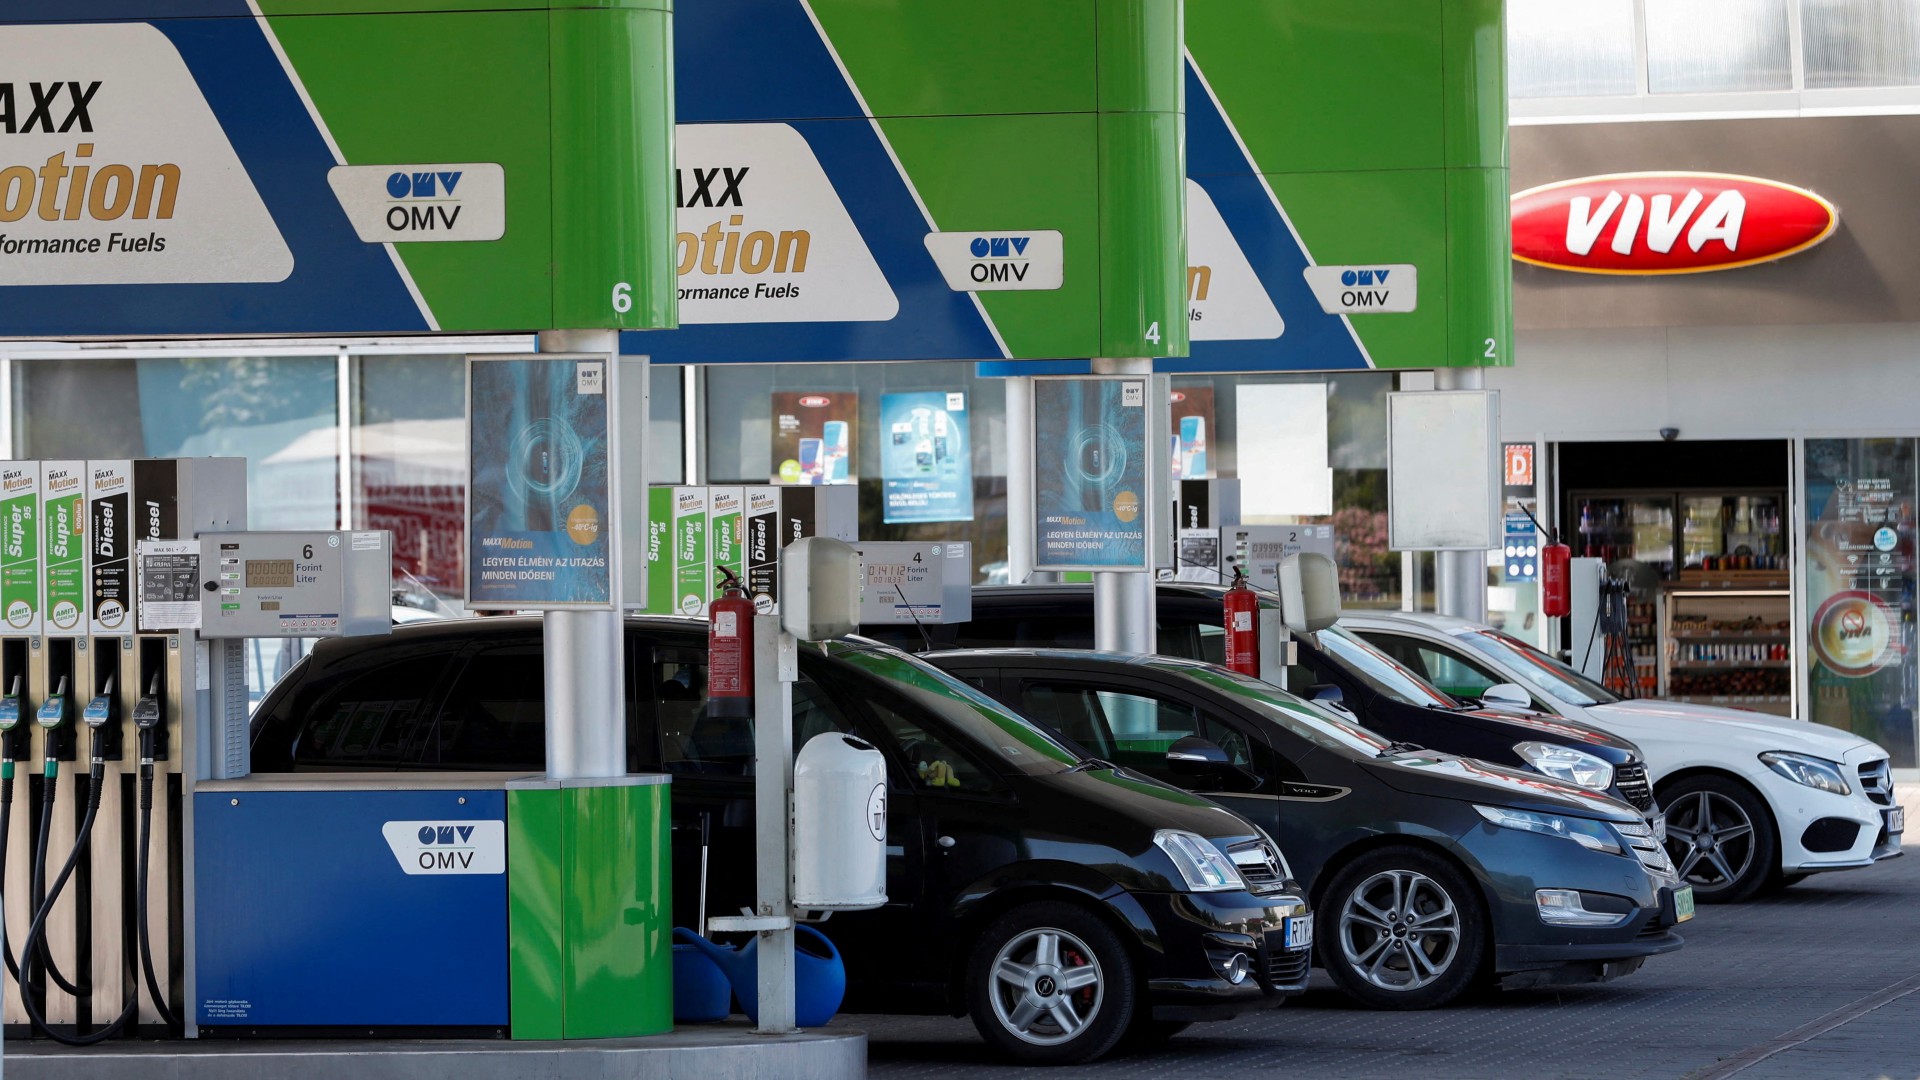 Many fuel stations are in danger of closure, according to the Alliance of Independent Petrol Station./Bernadett Szabo/Reuters